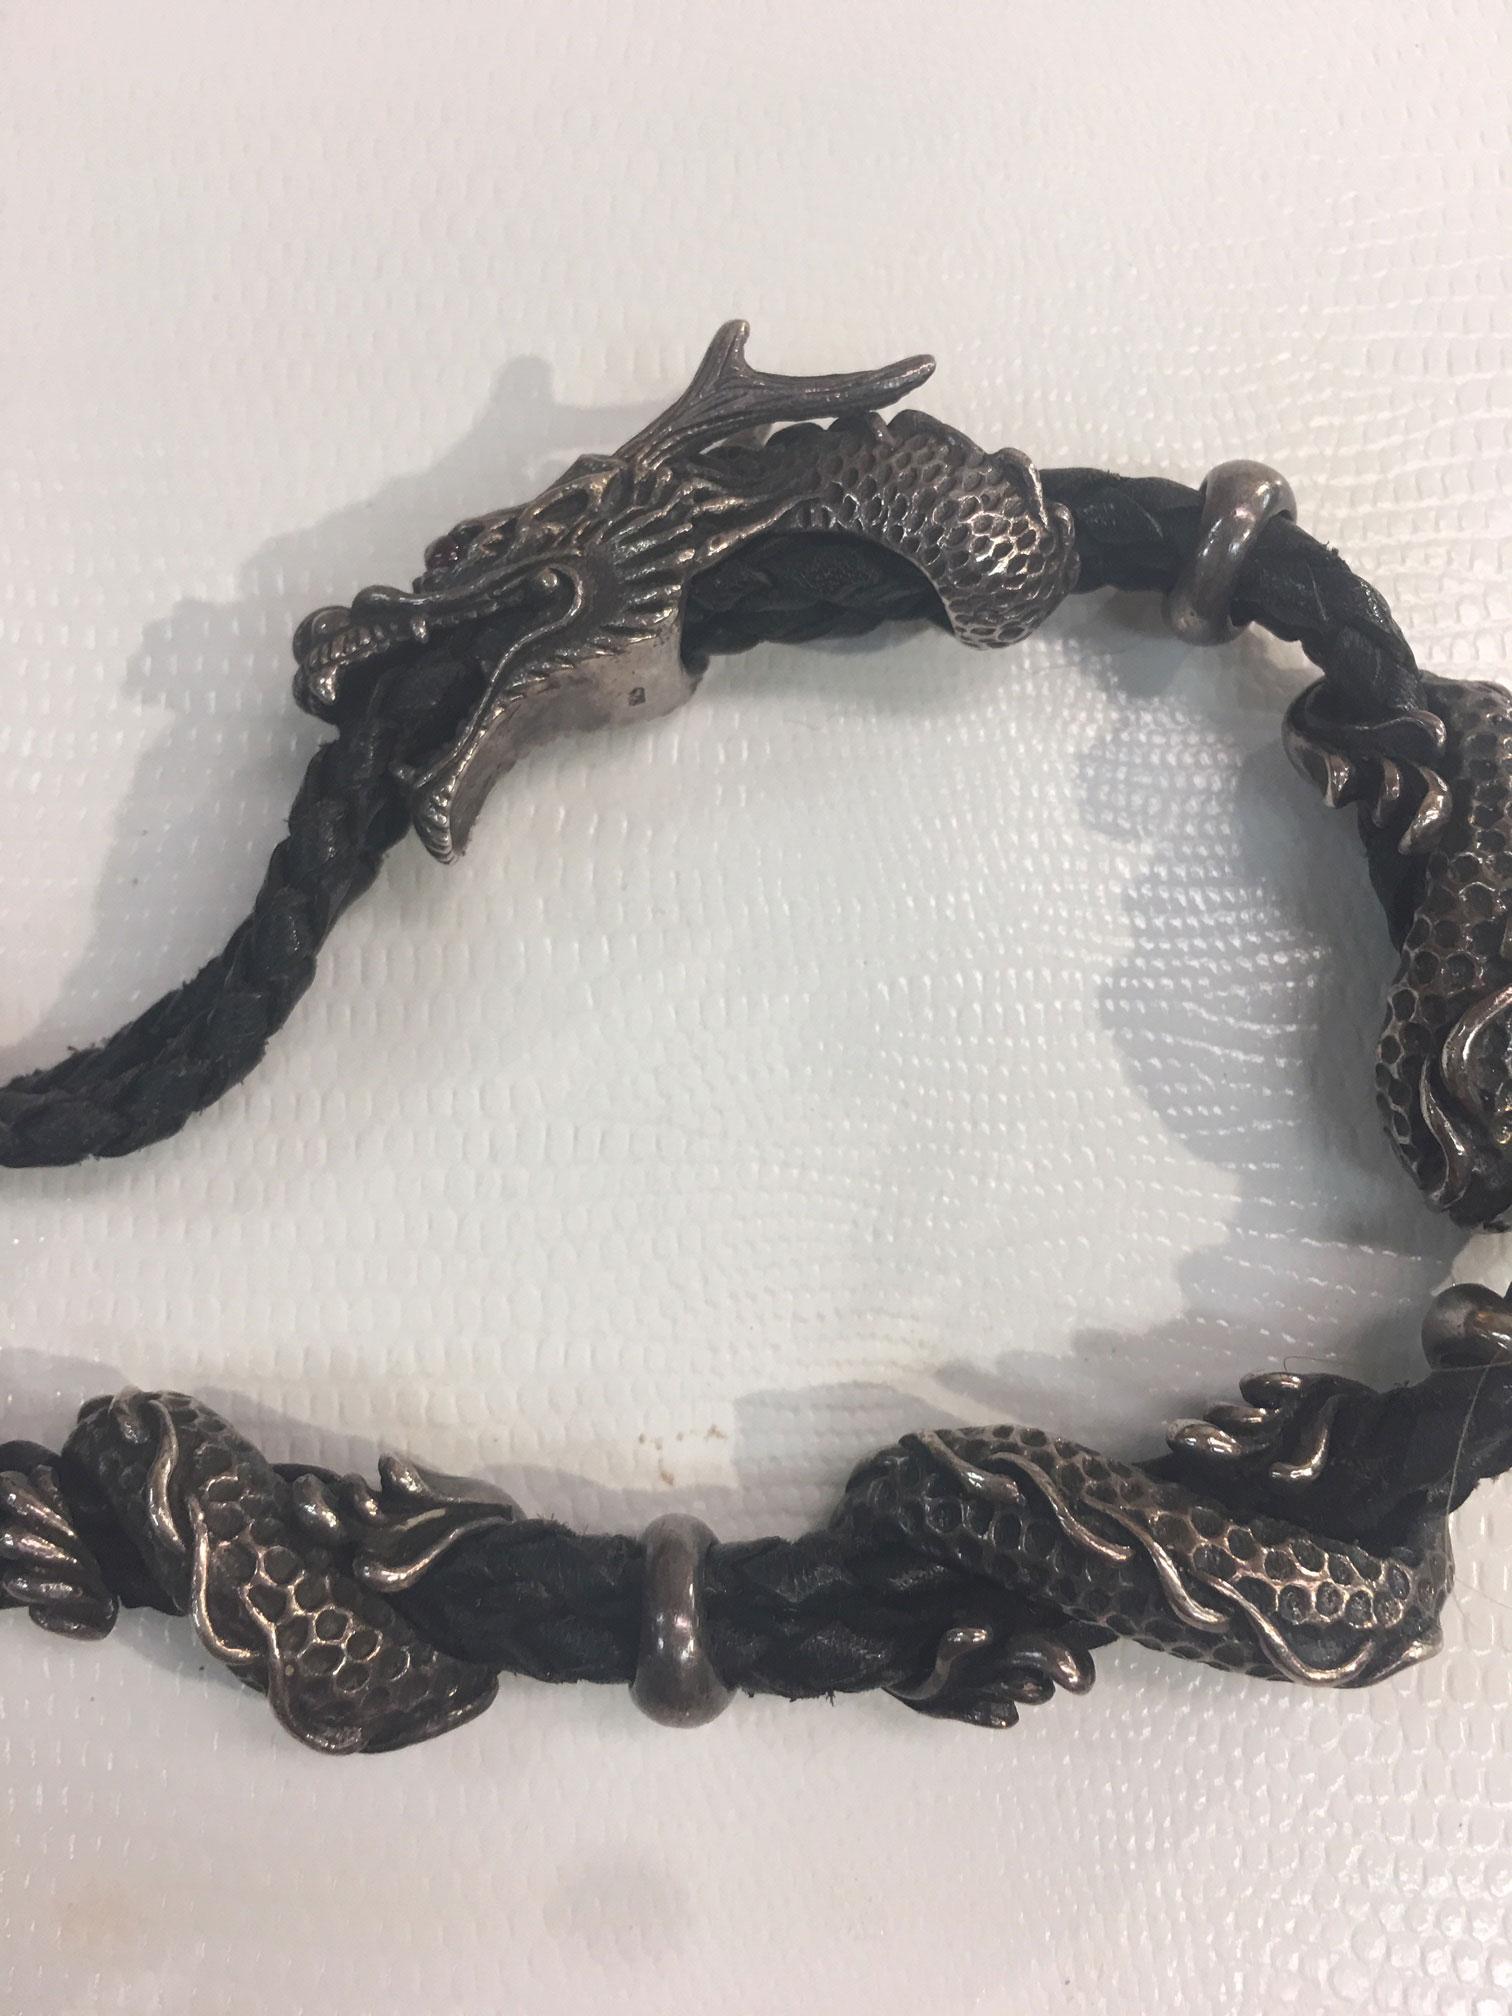 Undeniable unique, a blend of a Sterling Silver Dragon intertwined on a hand knotted black leather bracelet. It takes its inspiration from mythical beasts as majestic dragons encircle your wrist - from head down to coiled tail. For added detail, the